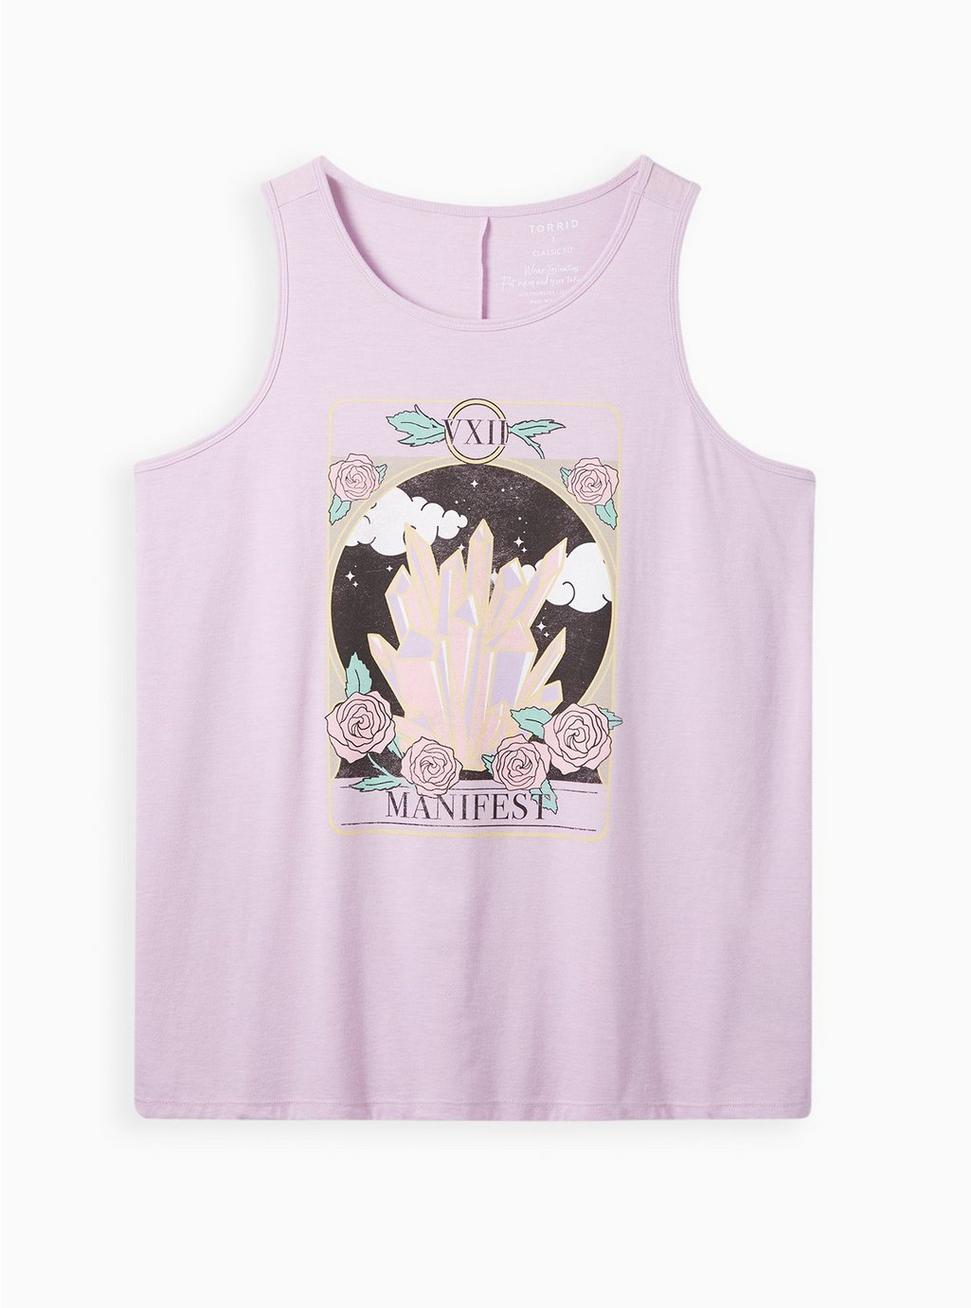 Everyday Tank - Signature Jersey Crystals Manifest Lavender, ORCHID BLOOM, hi-res